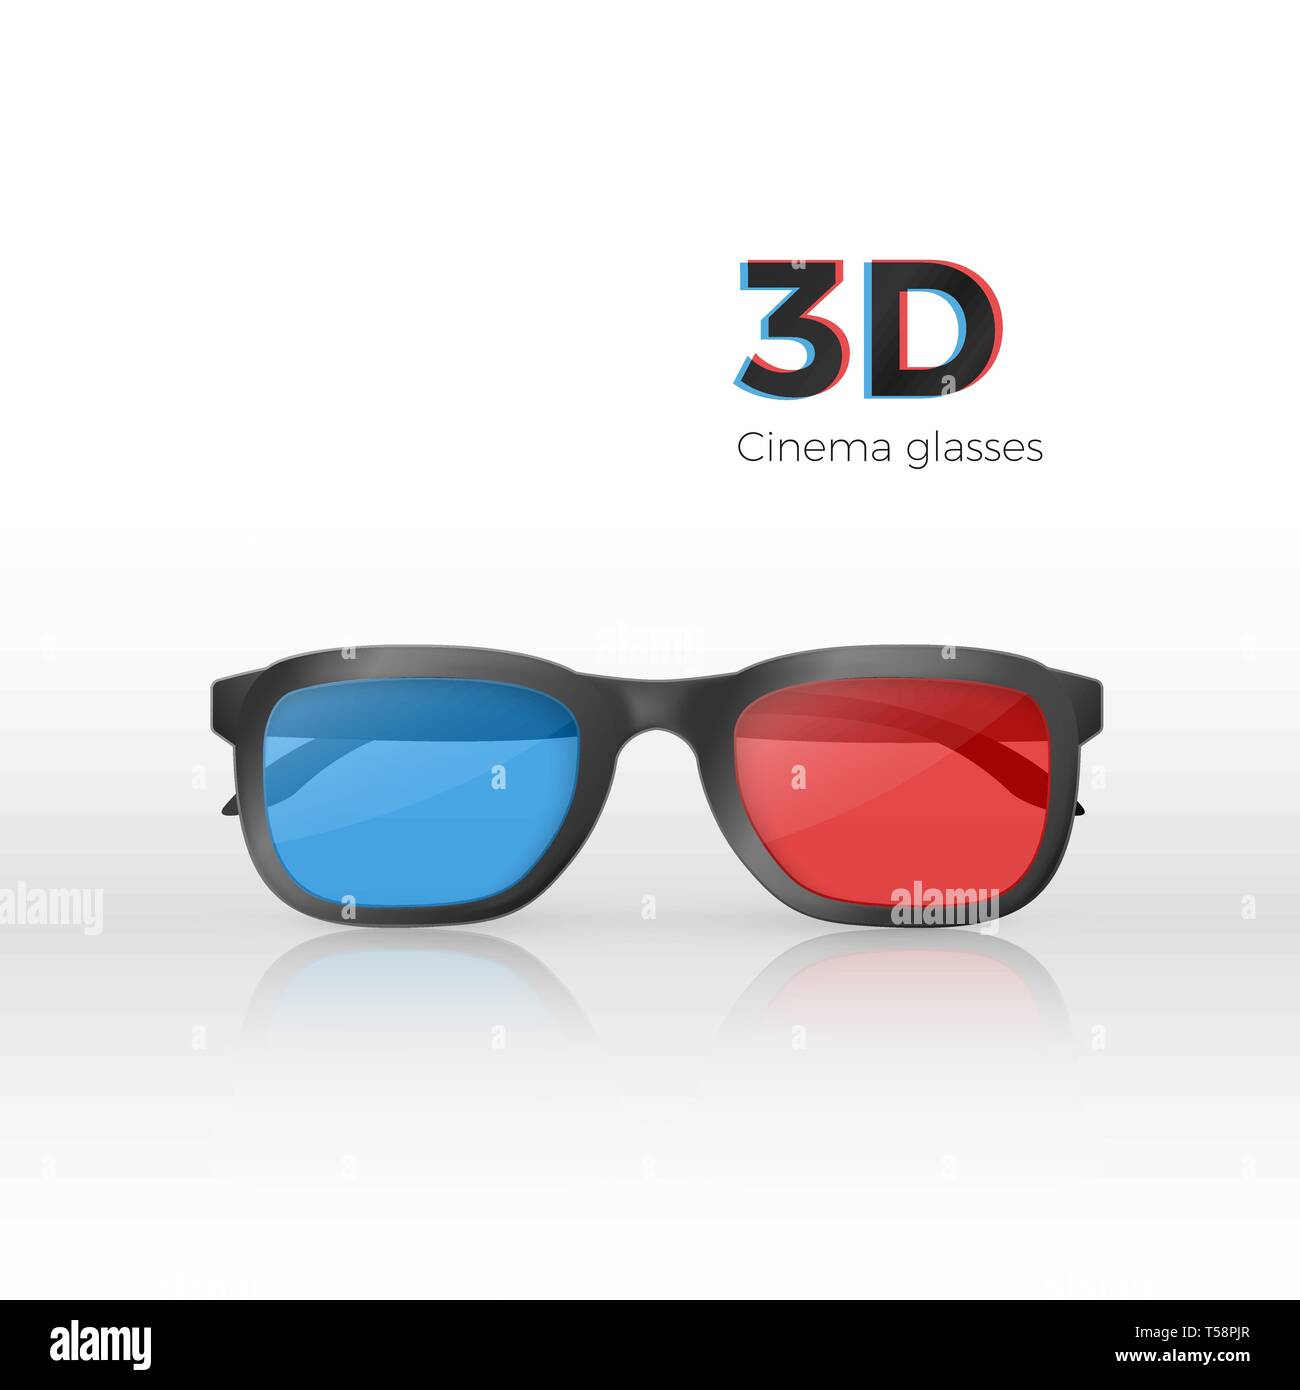 Realistic 3d cinema glasses front view. Plastic glasses with red and blue glass for watching movies. Vector illustration Stock Vector